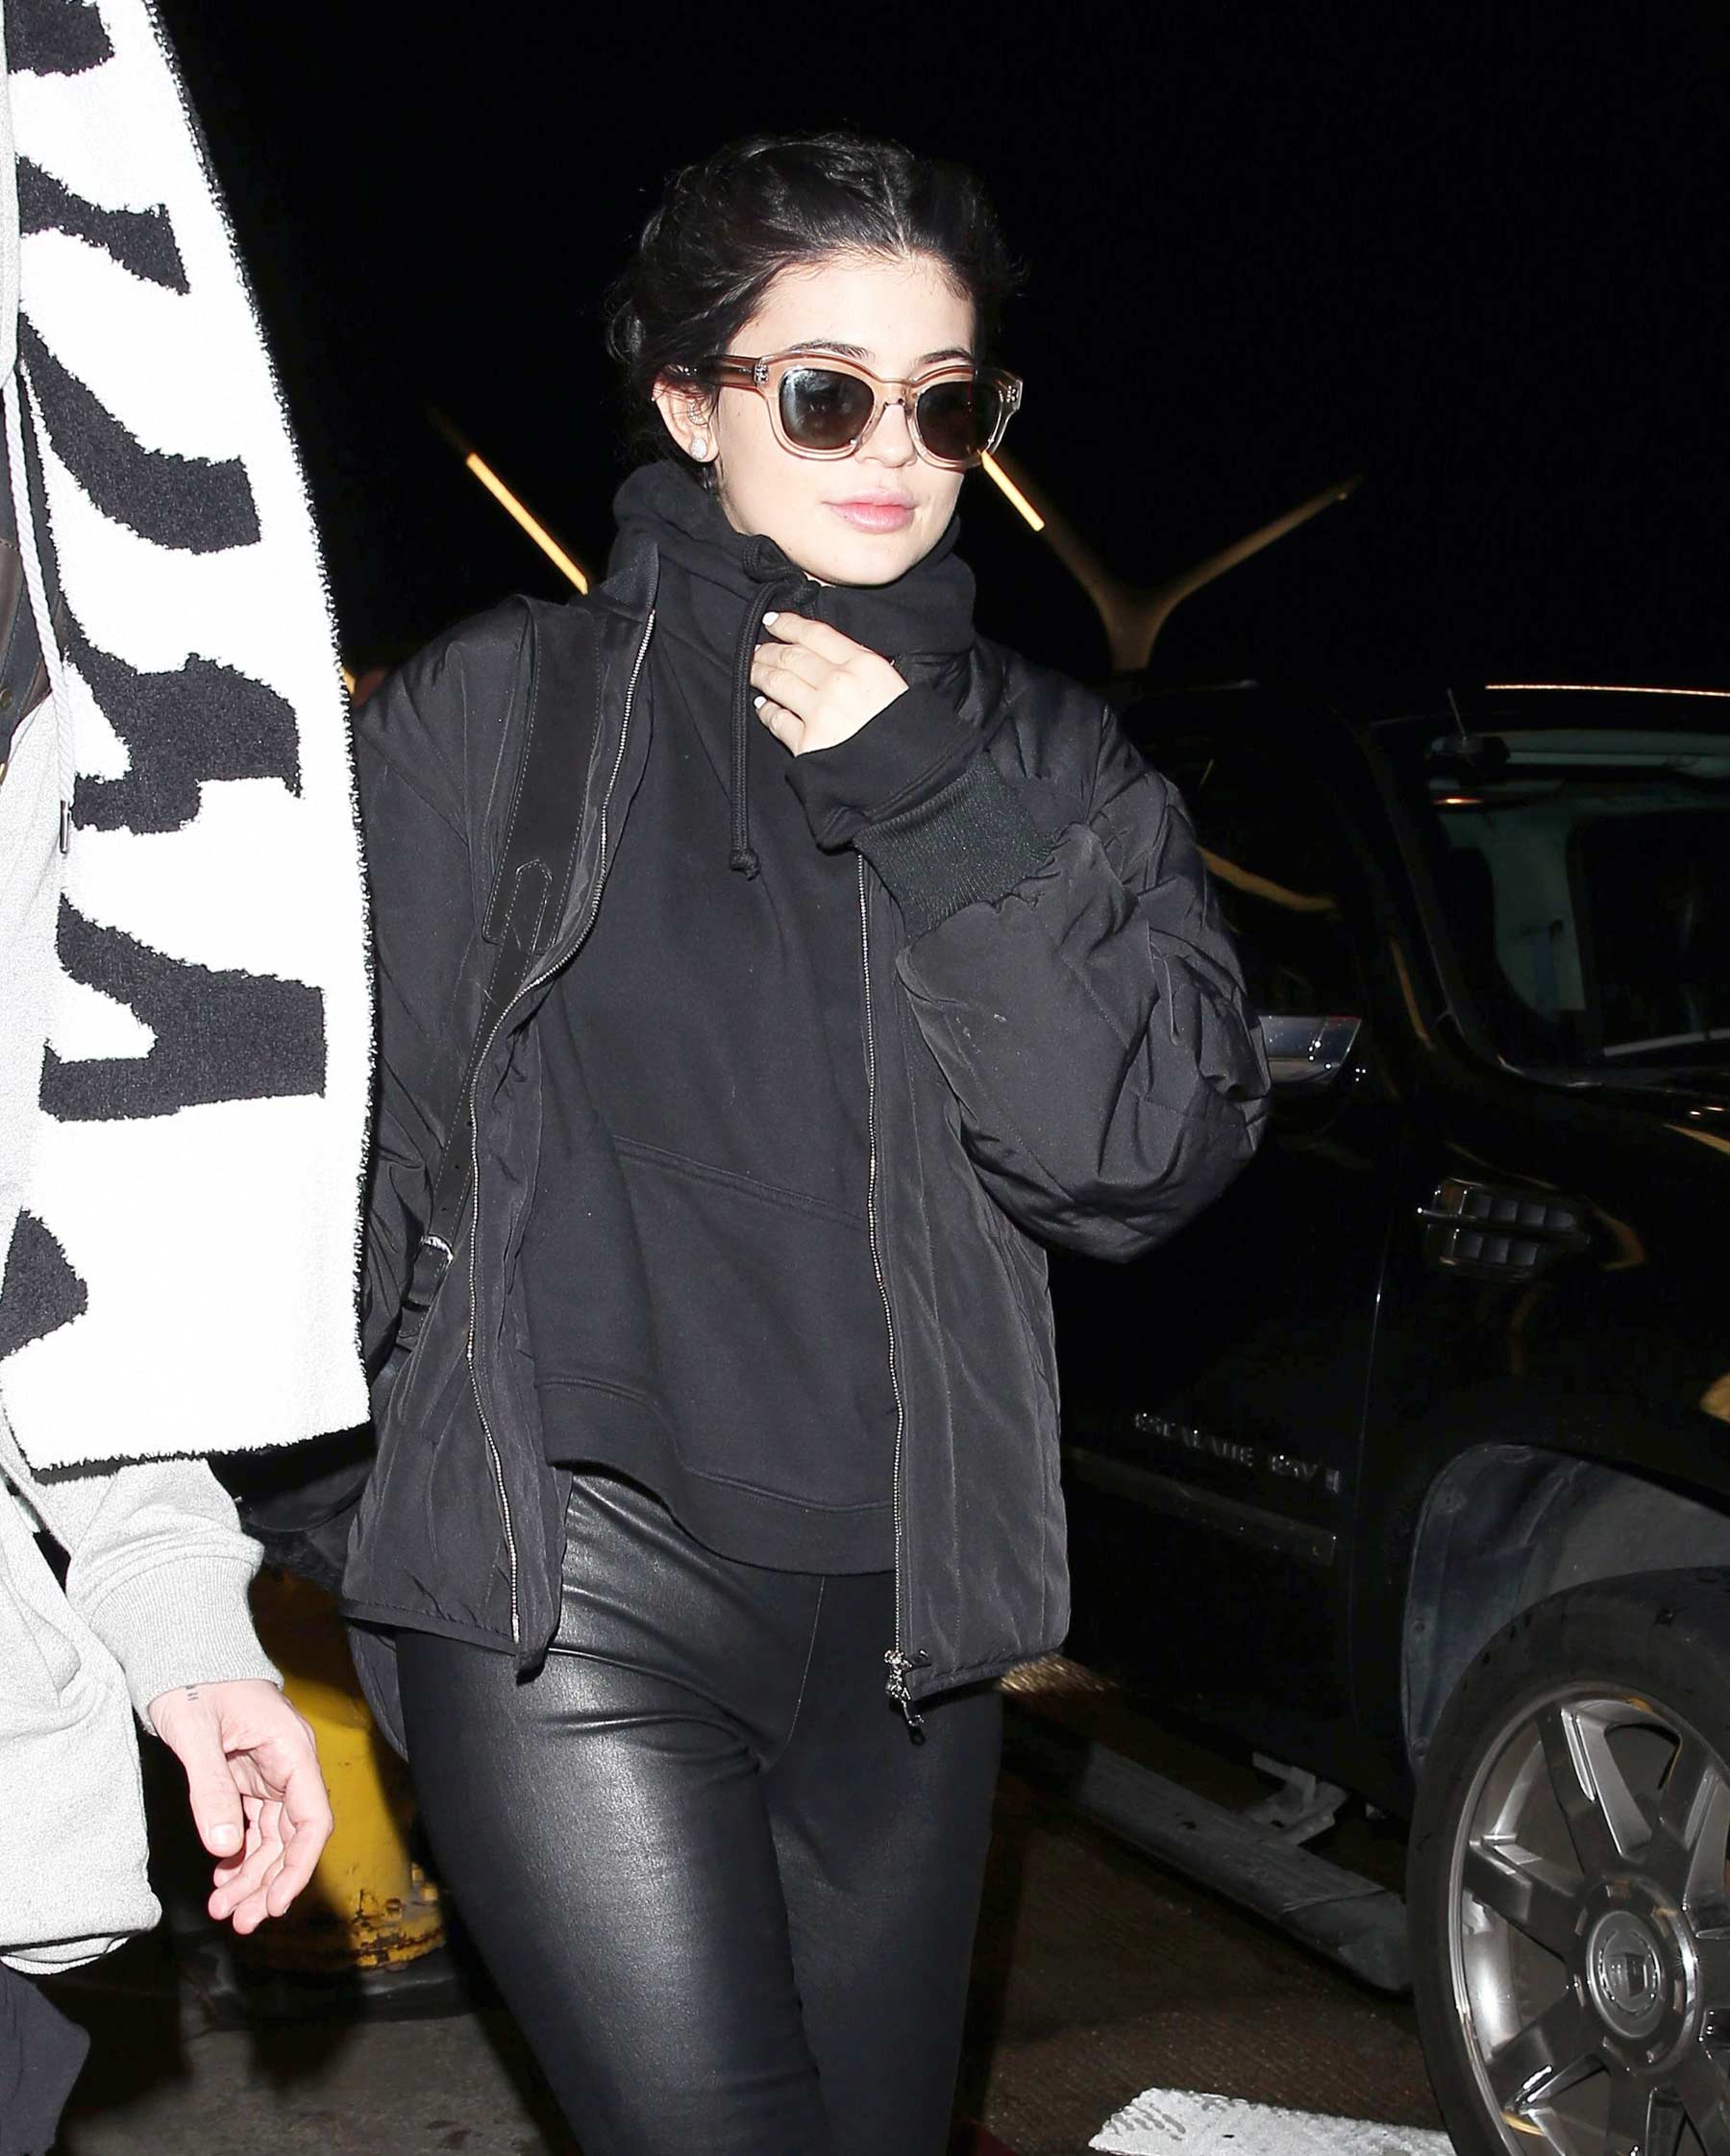 Kylie Jenner leaving LAX airport